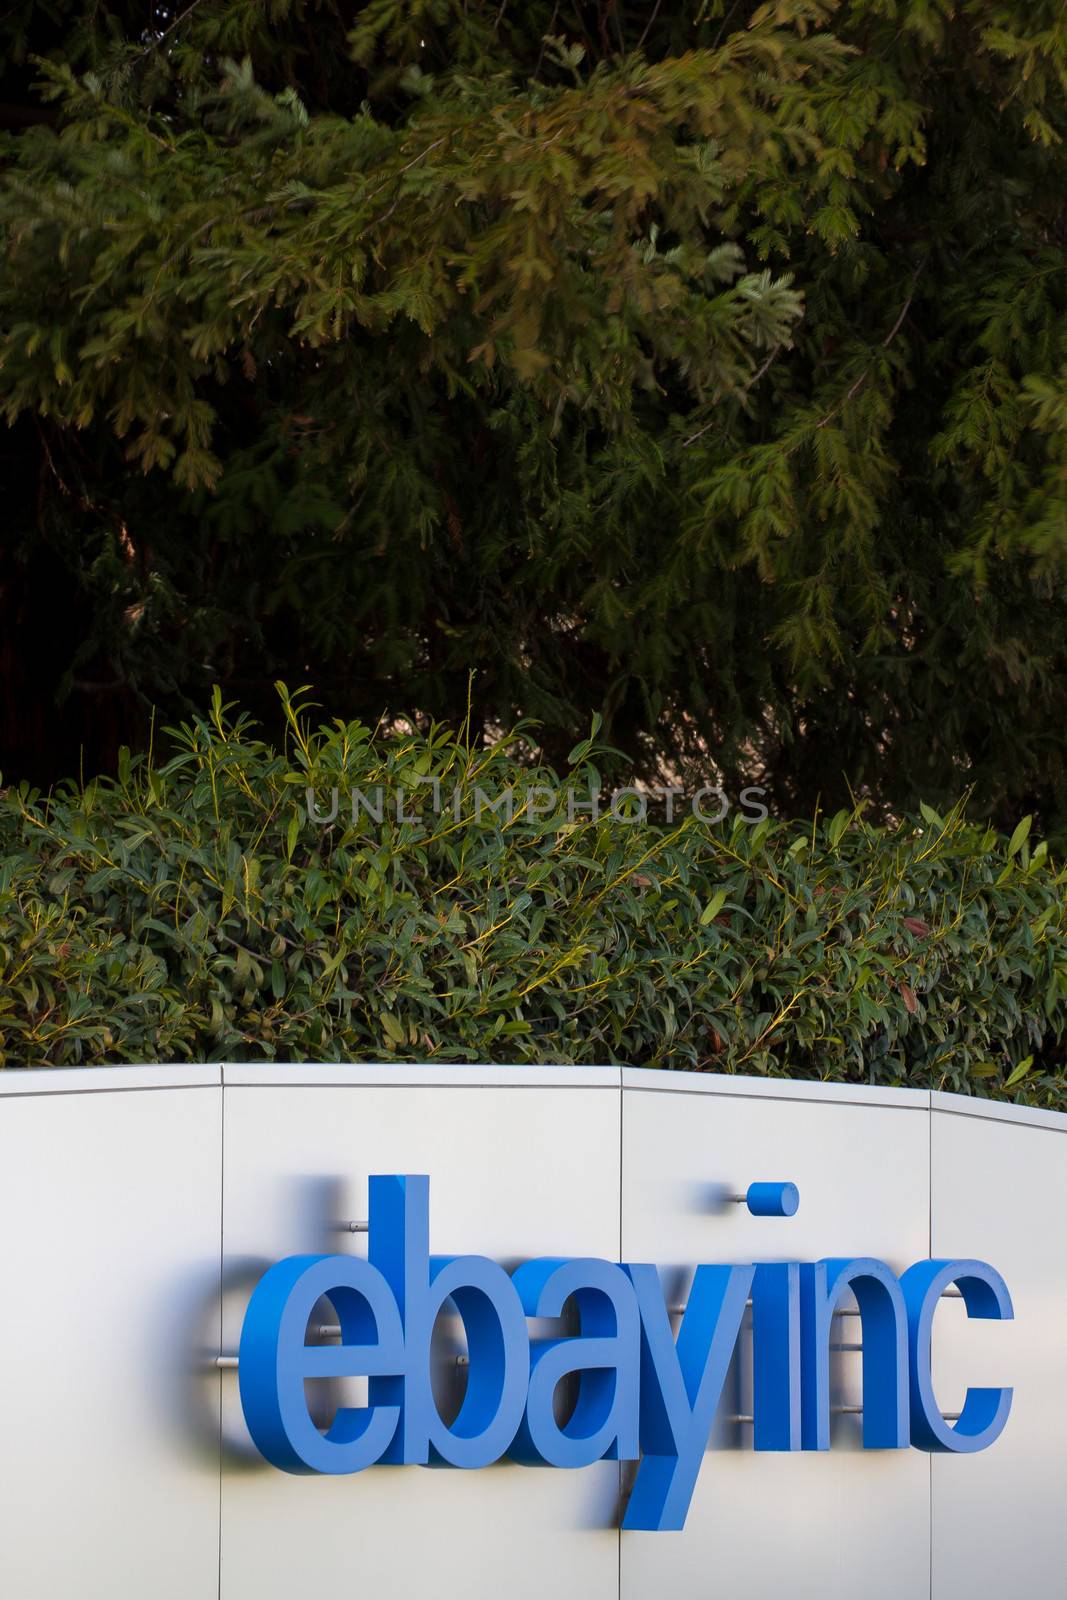 Ebay Corporate Headquarters Sign by wolterk